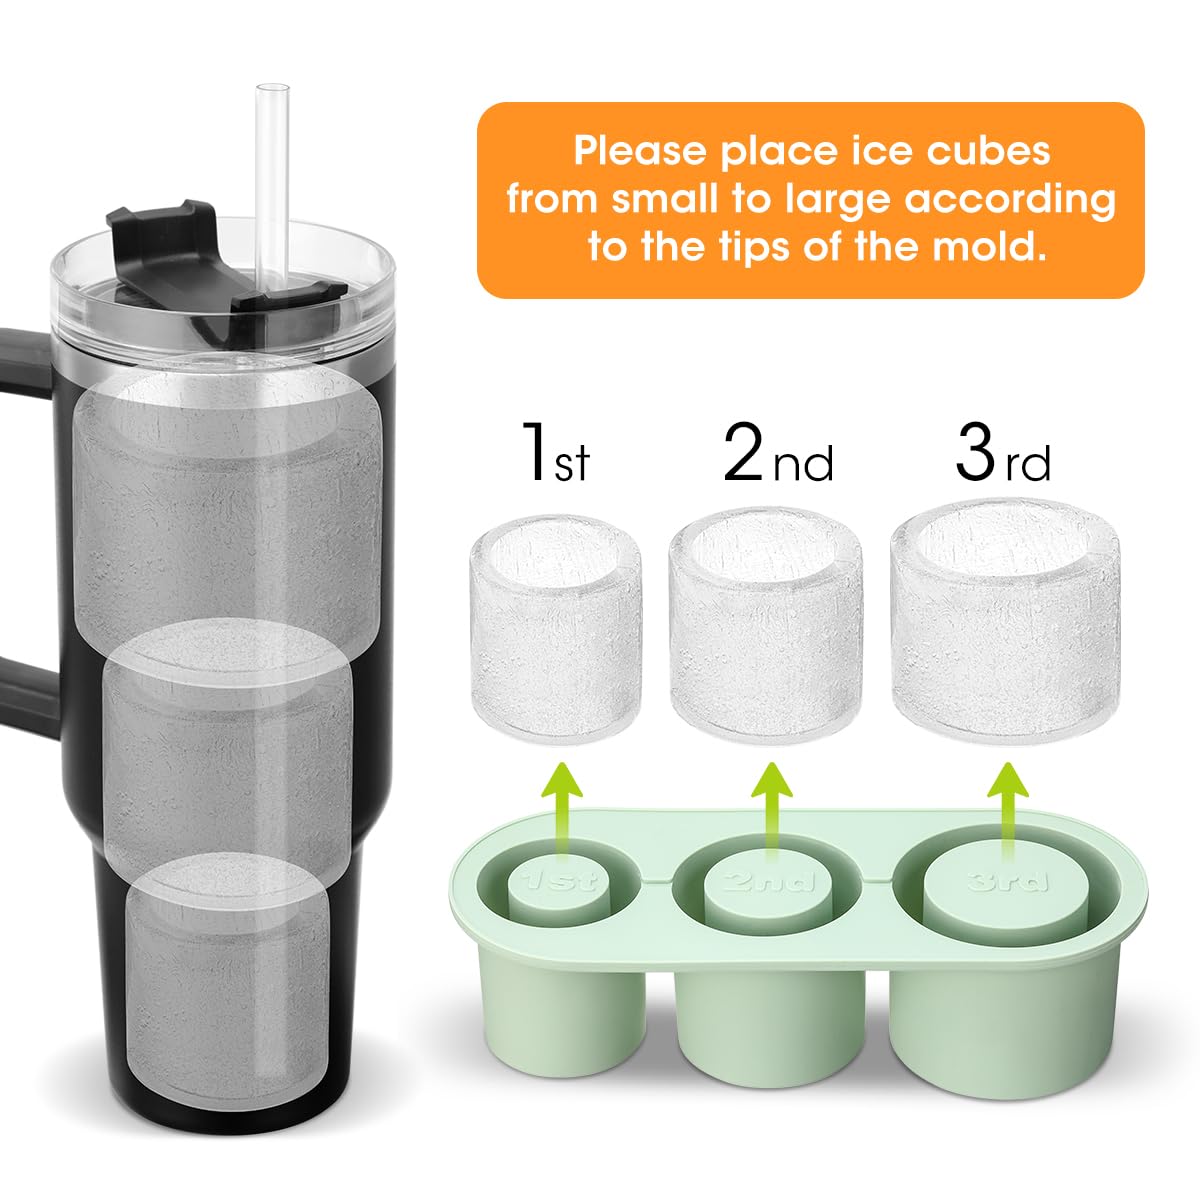  ensuring your drinks stay cold for longer and the straw can easily be inserted into the bottom